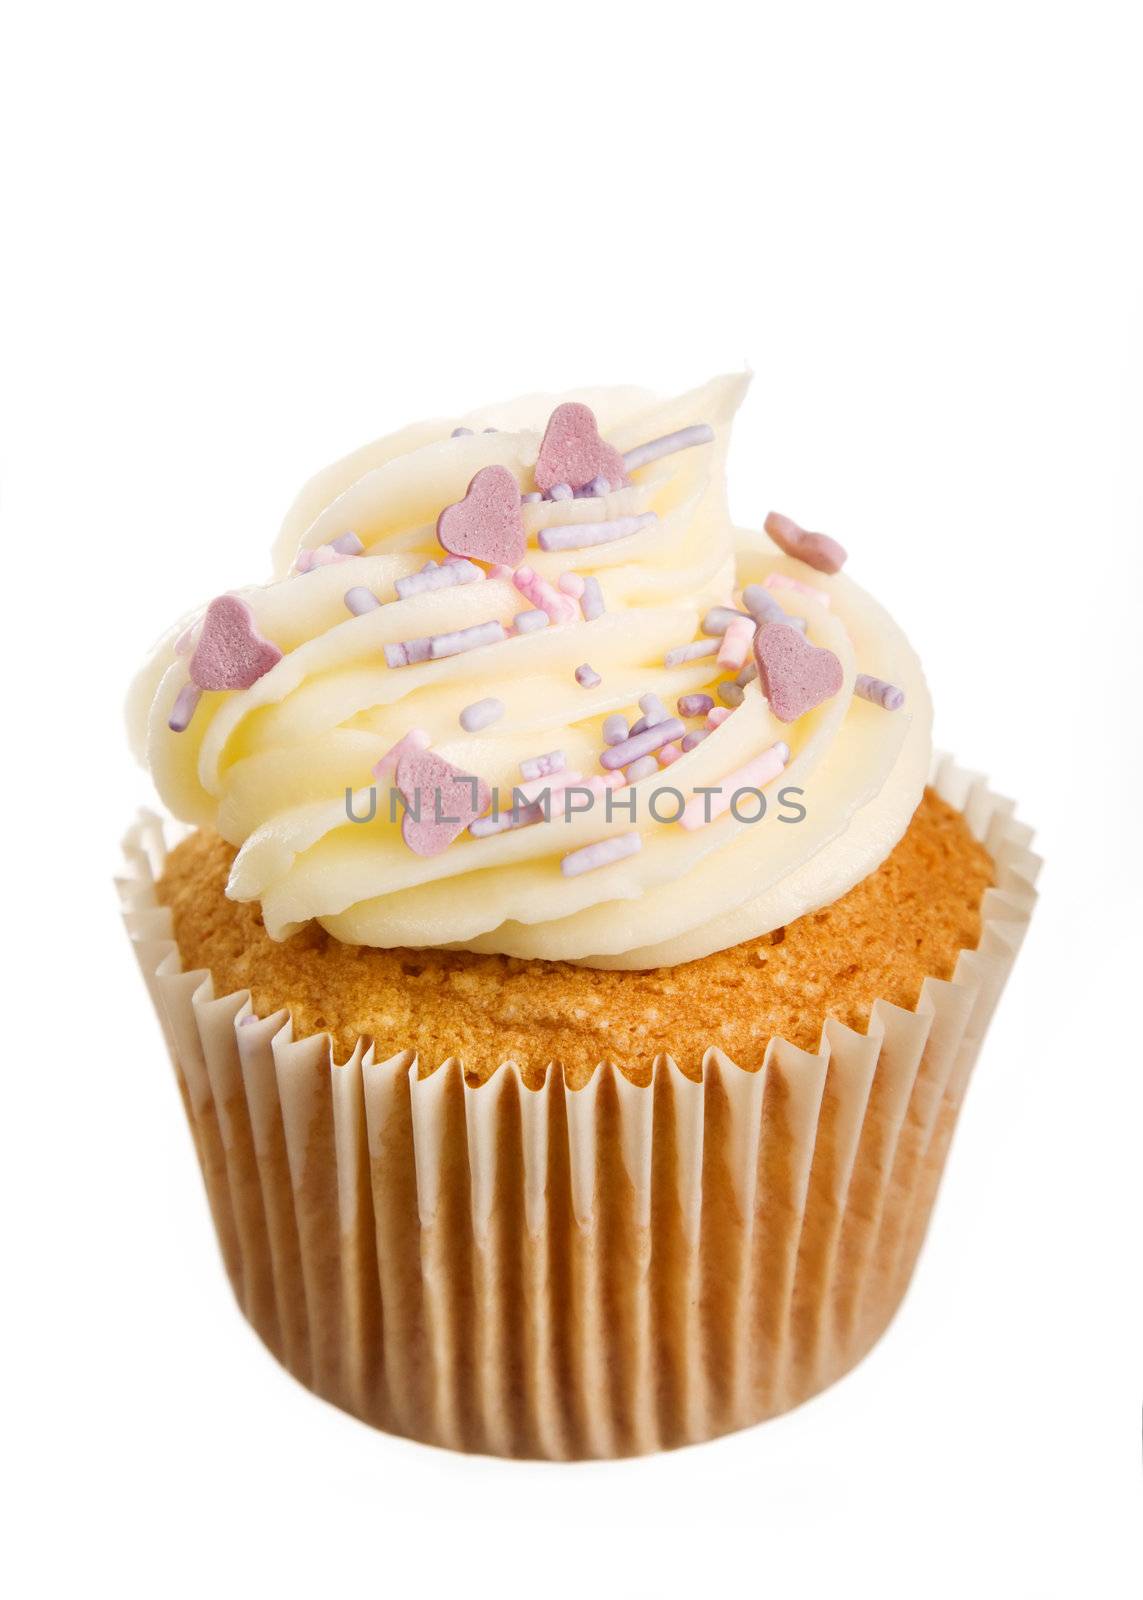 Cupcake decorated with frosting and purple sprinkles